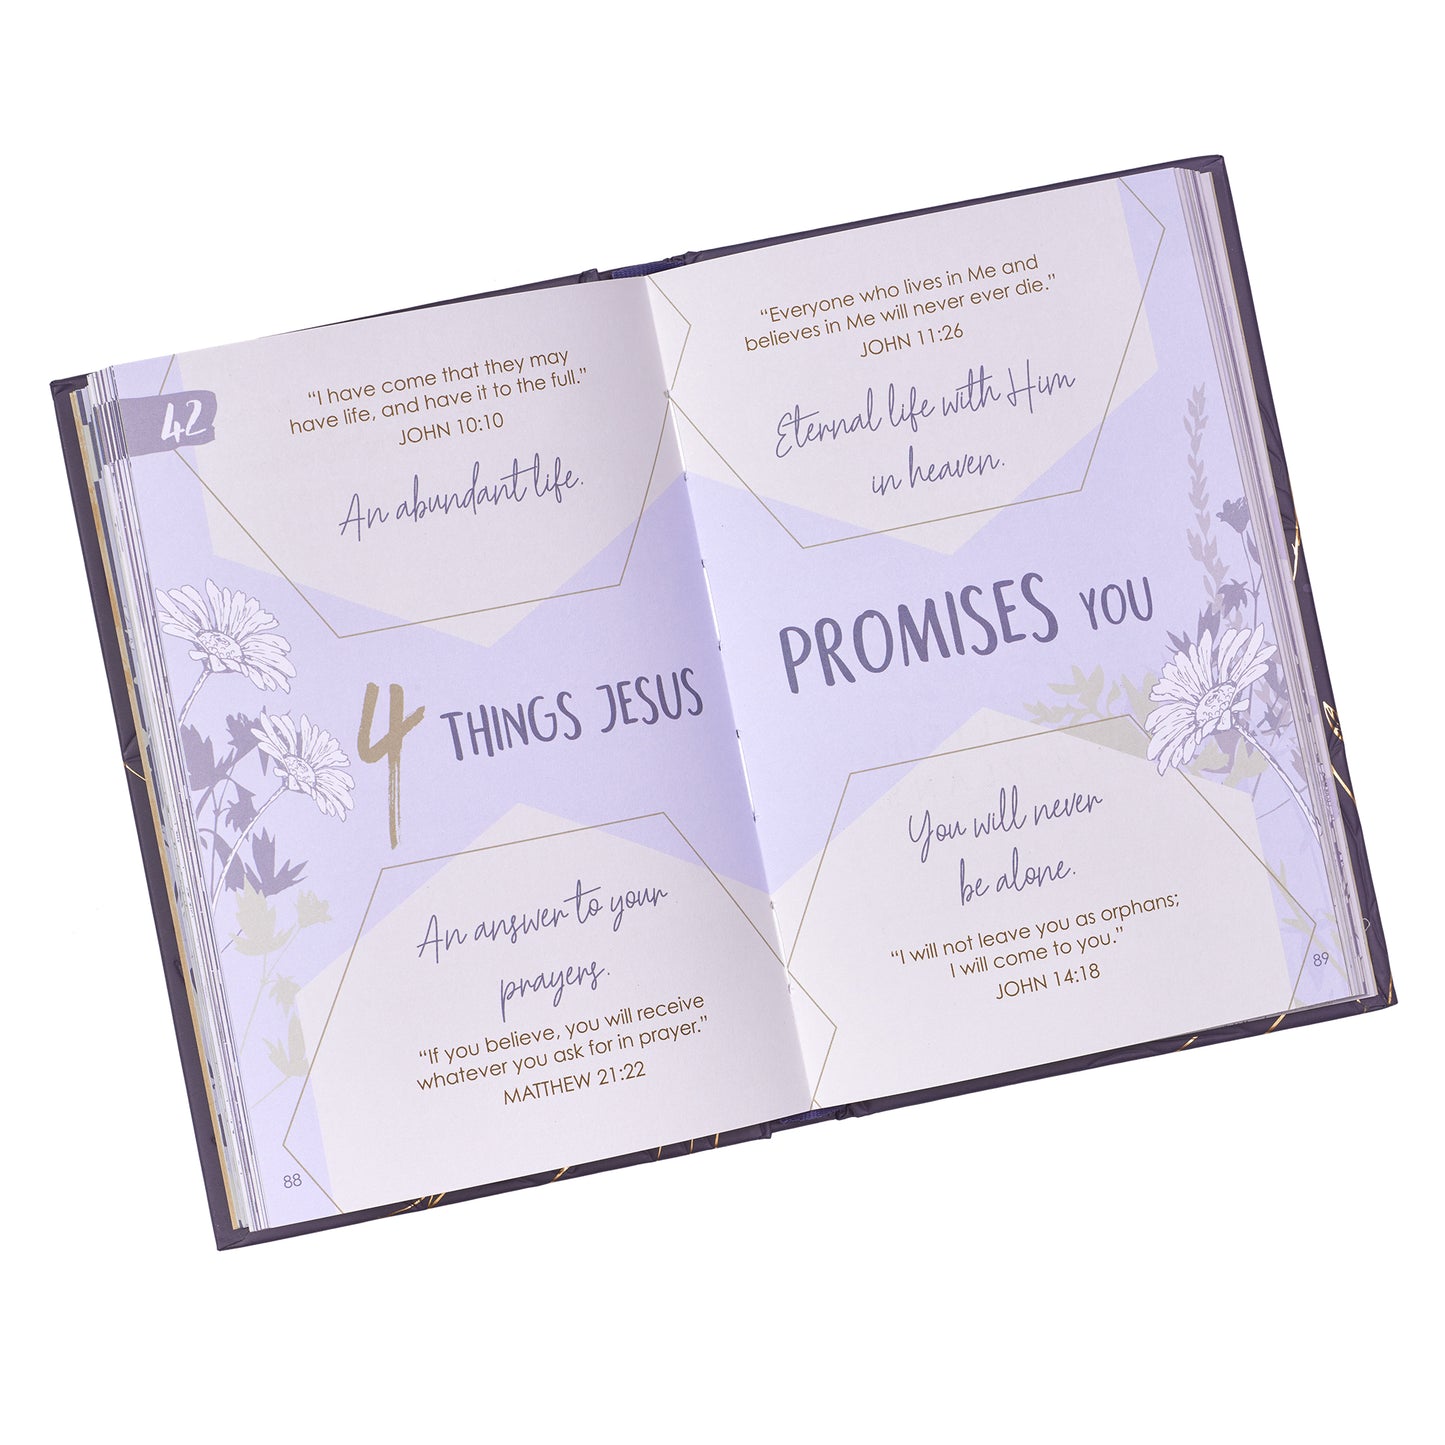 Life Lists for Women Gift Book - The Christian Gift Company